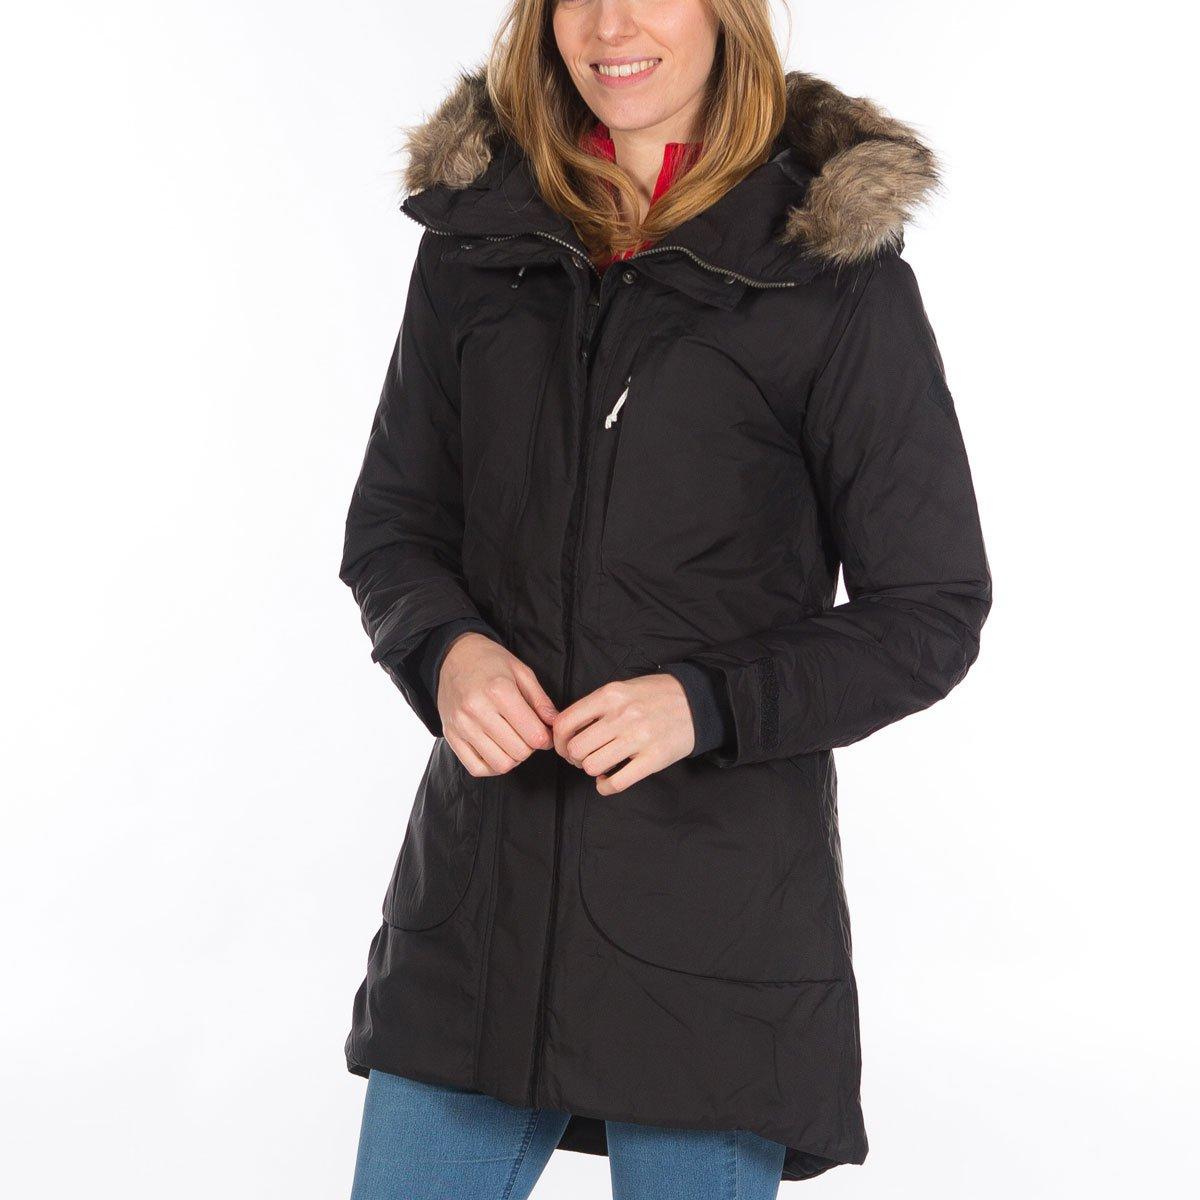 Didriksons Women's Parka in Black Tiso